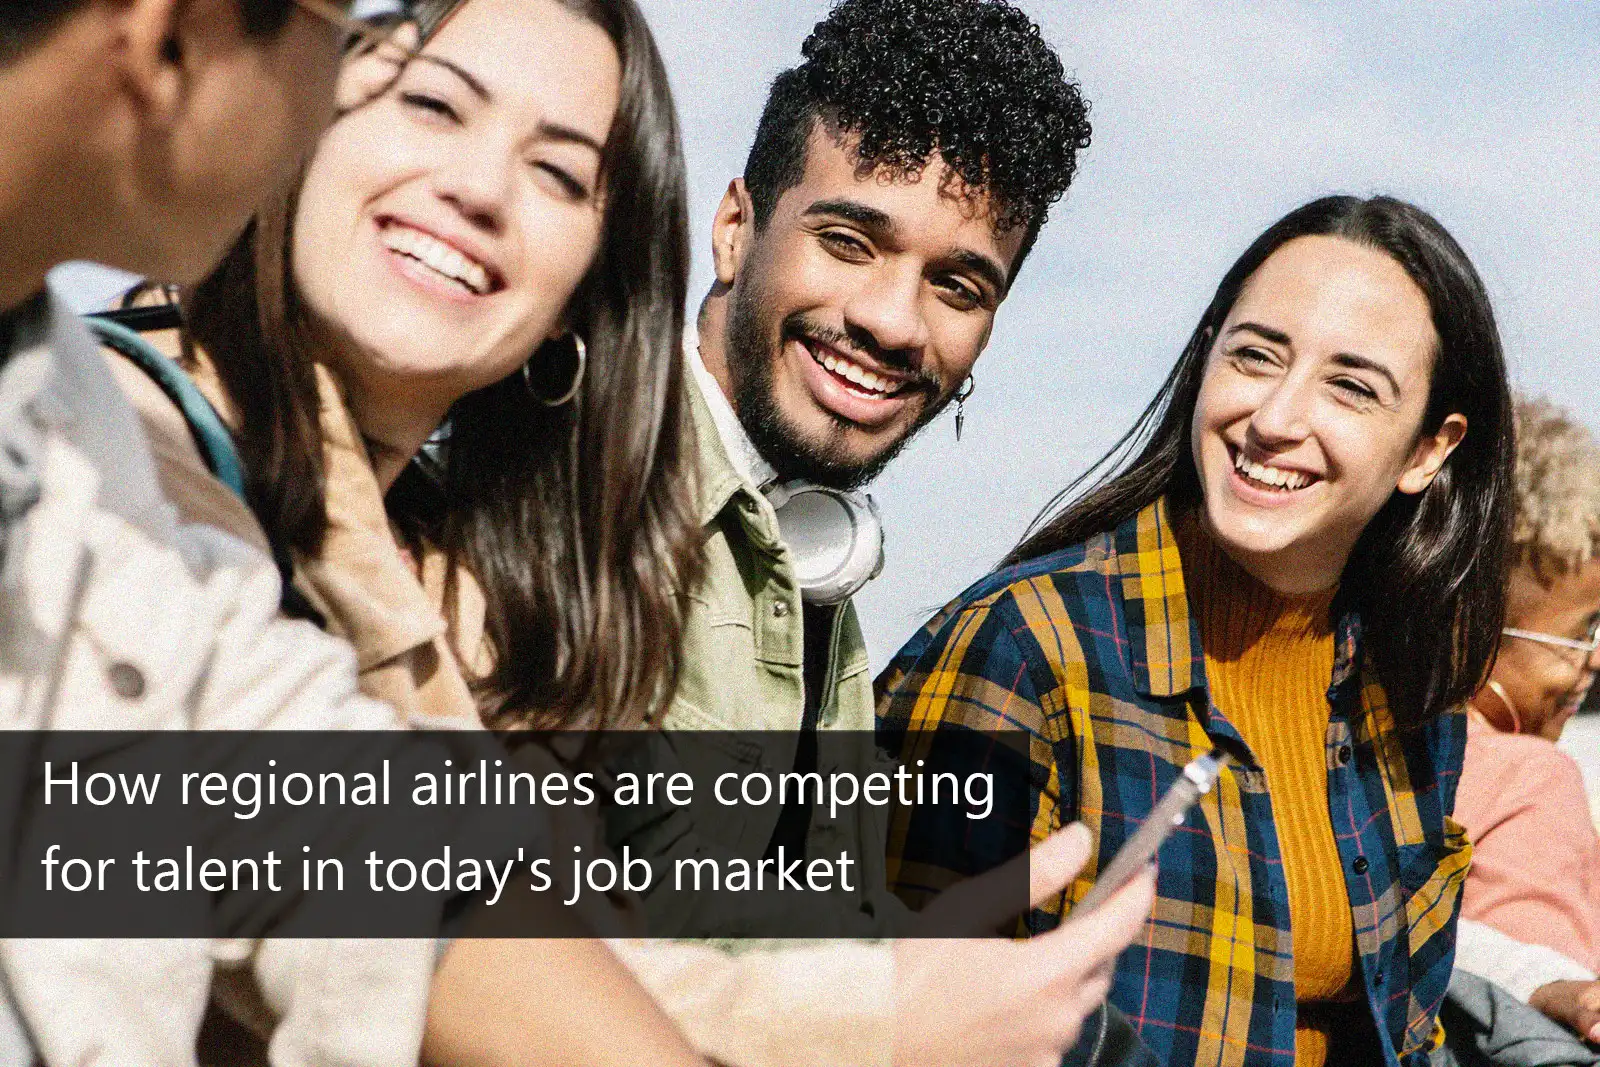 How regional airlines are competing for talent in today's job market